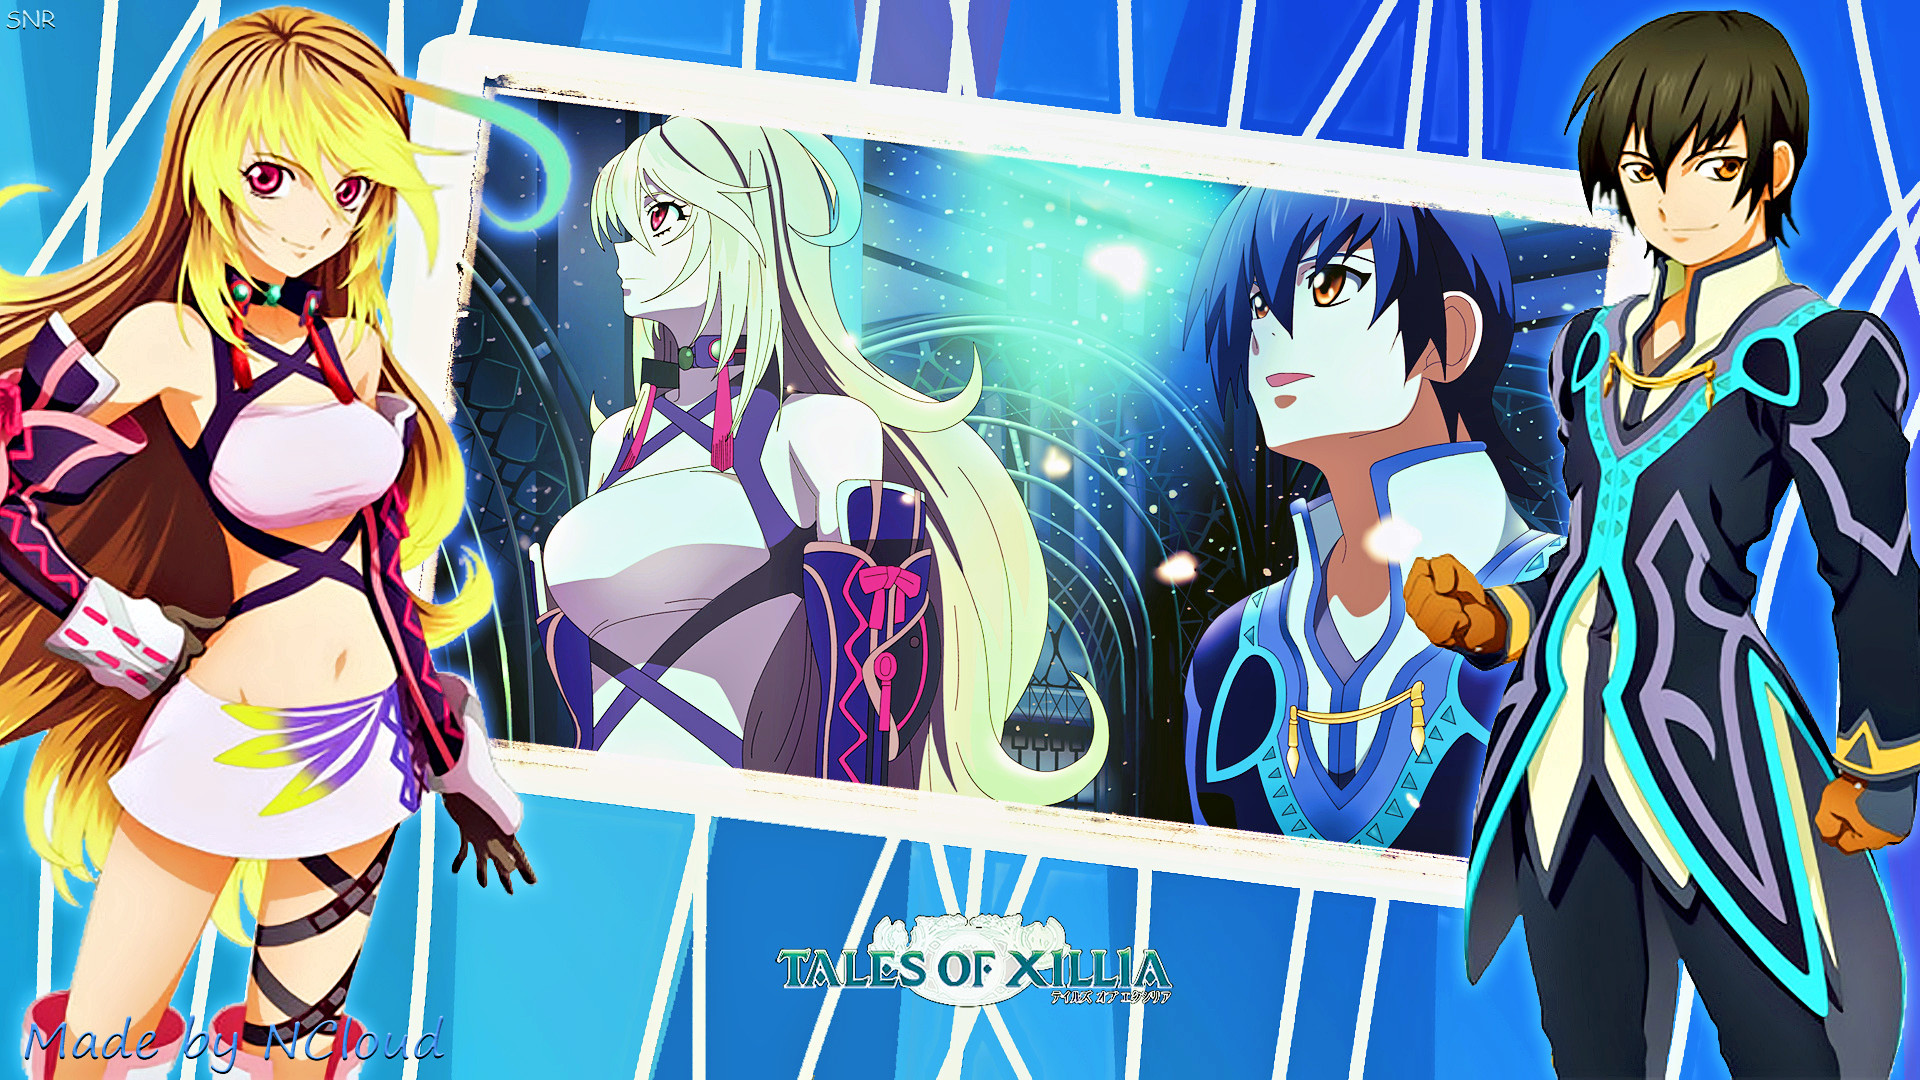 1920x1080 ... Interesting Tales Of Xillia Super HD Background Wallpapers Collection:   on GsFDcY Graphics